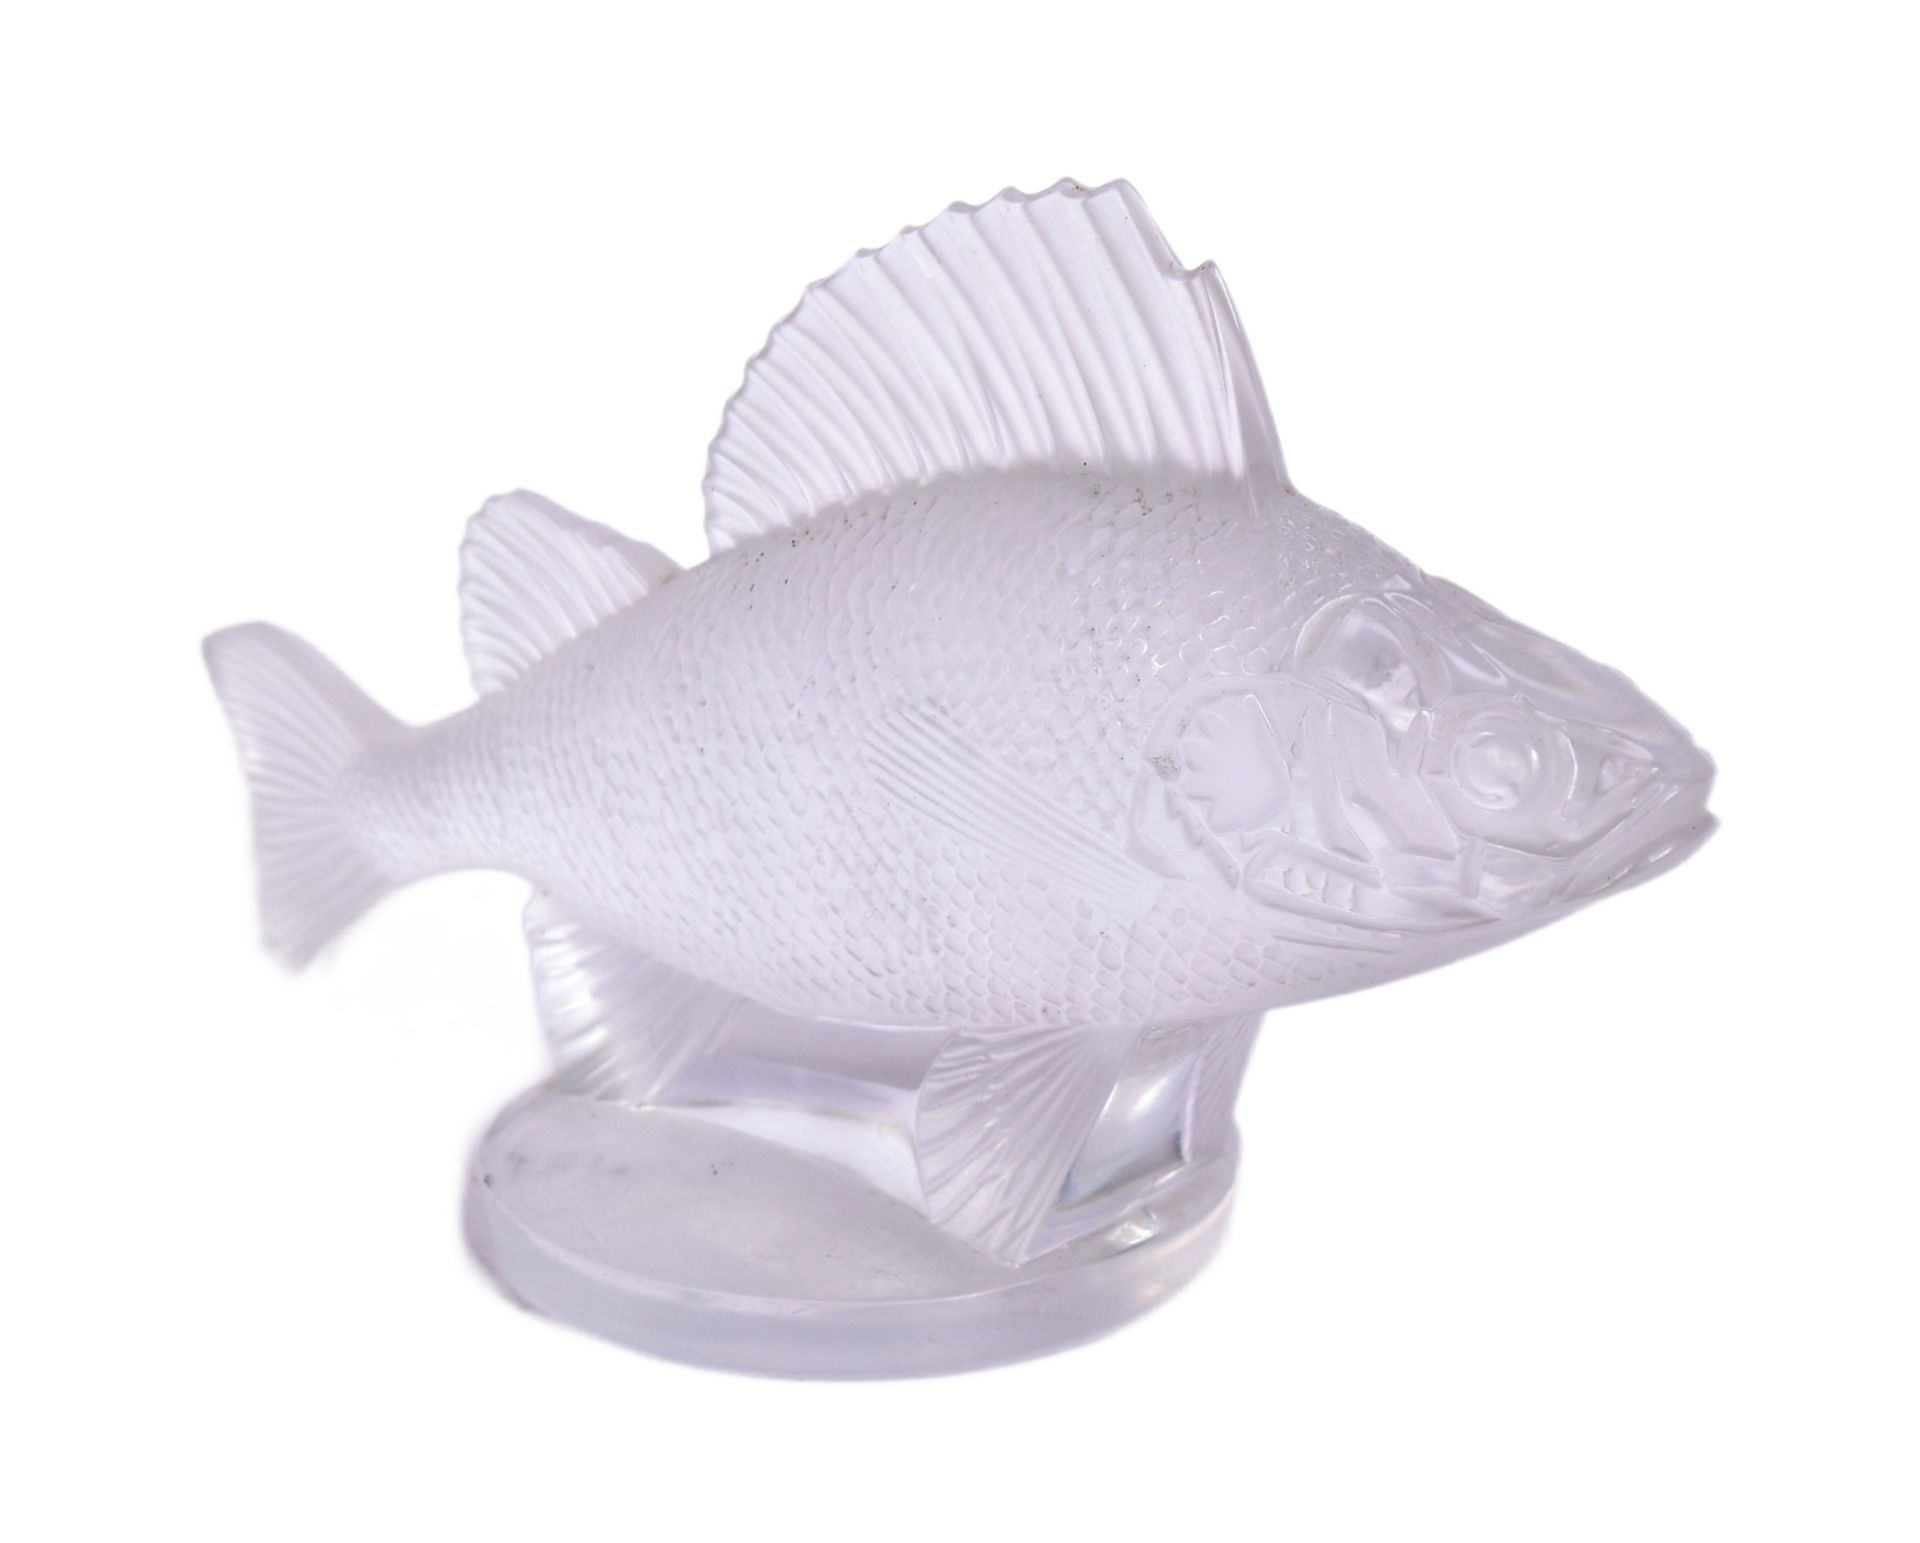 RENE LALIQUE - FROSTED GLASS PERCH FISH CAR MASCOT